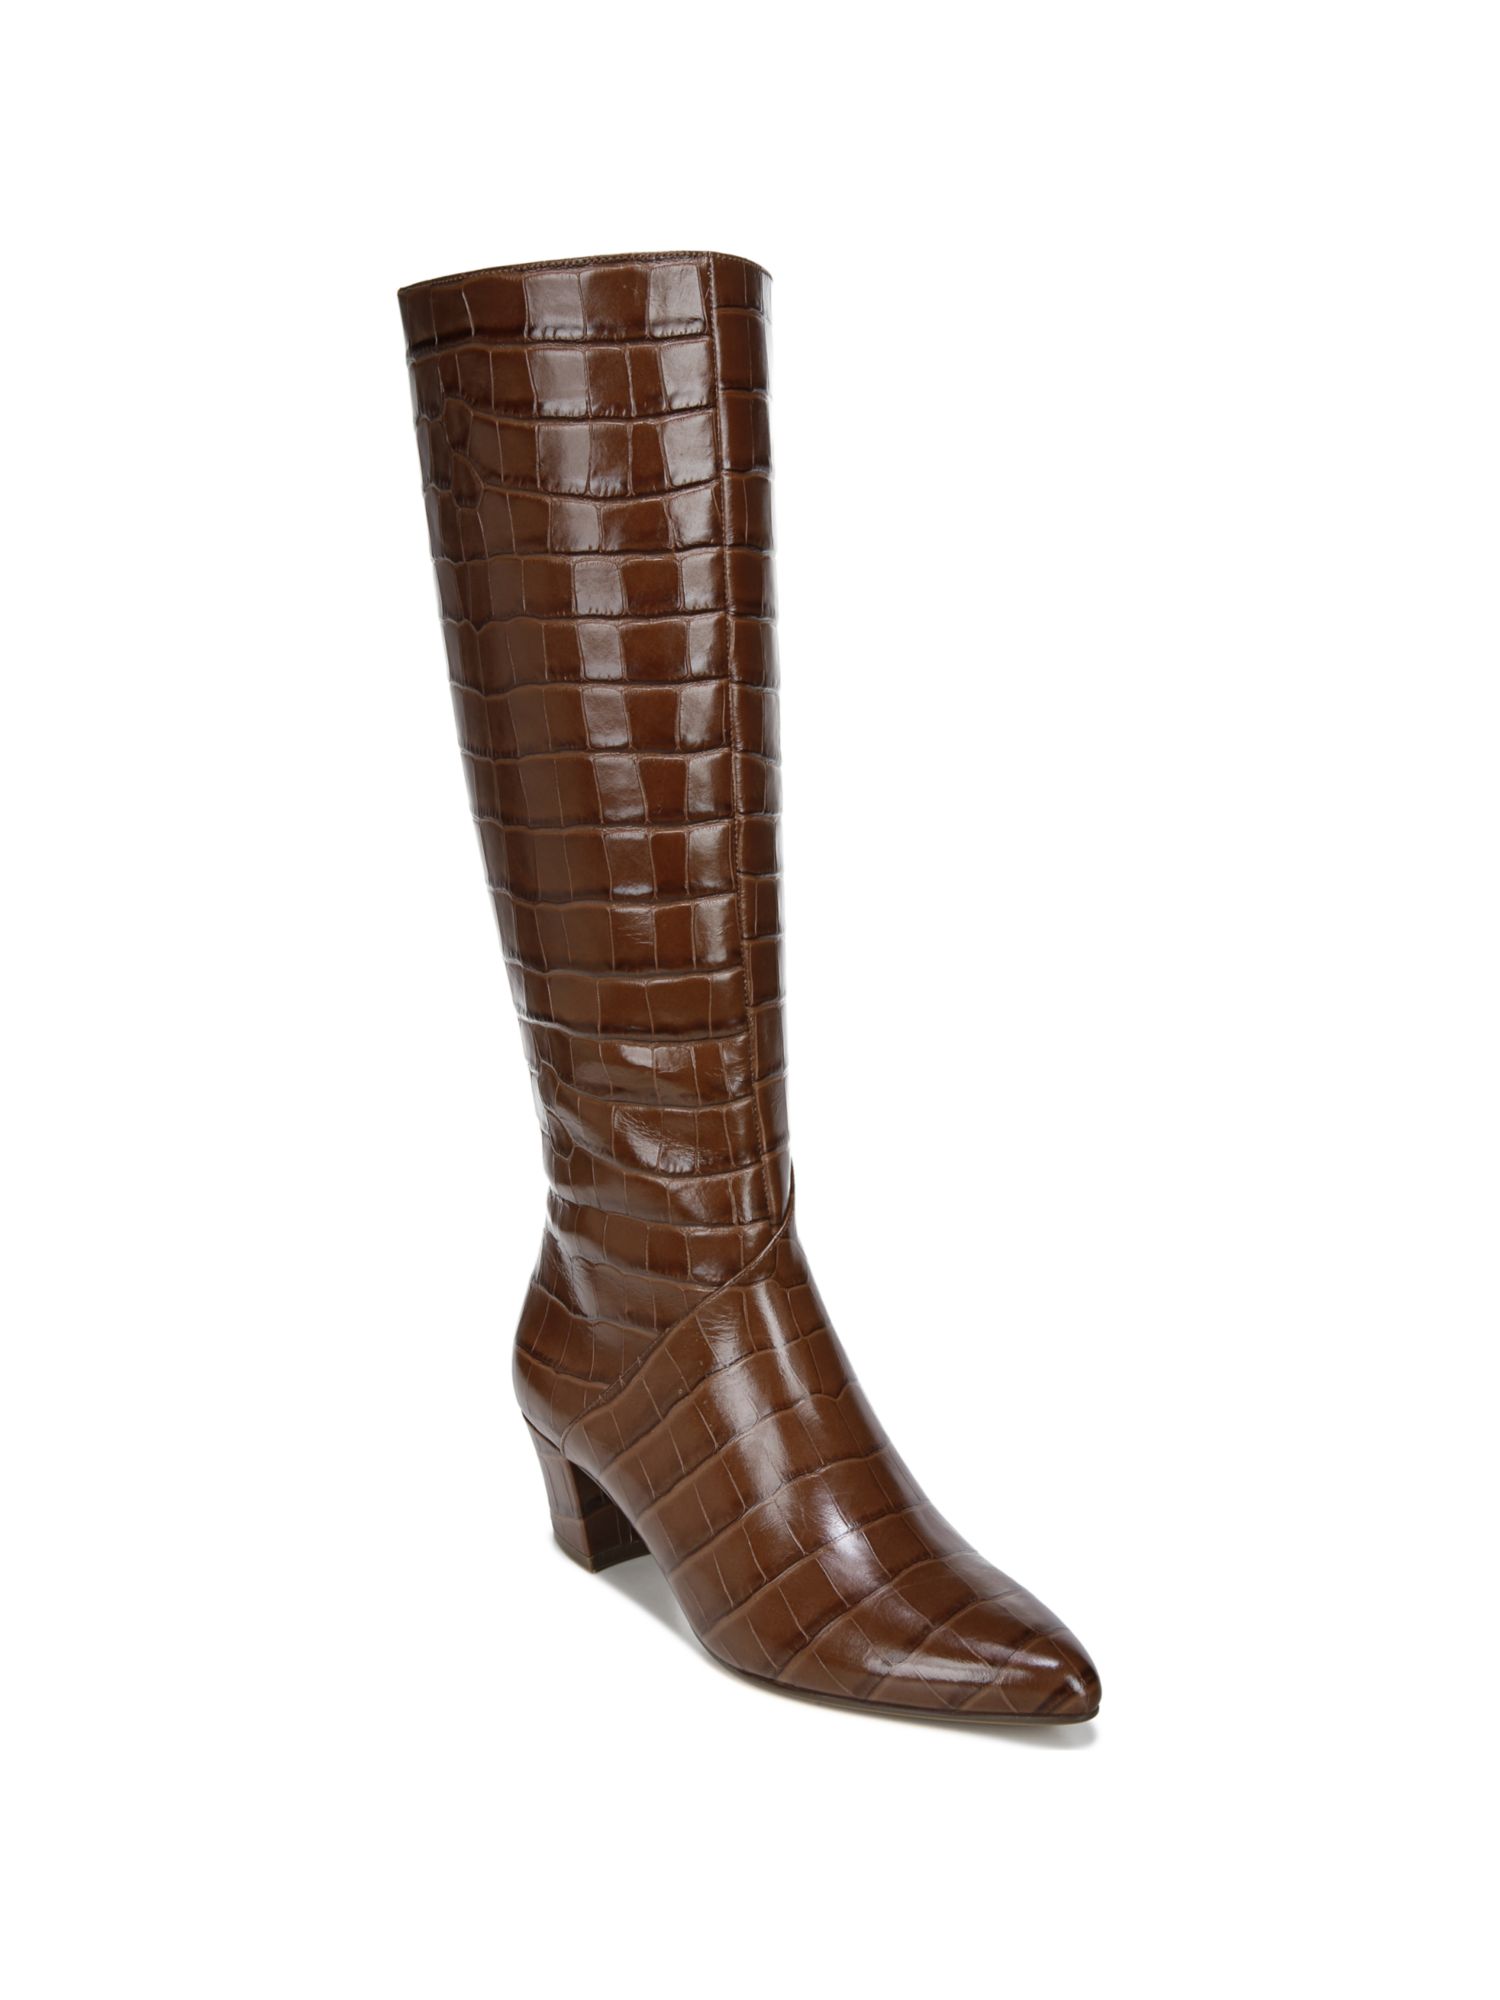 NATURALIZER Womens Brown Crocodile Wide Calf Melanie Leather Heeled Boots 8 W WC